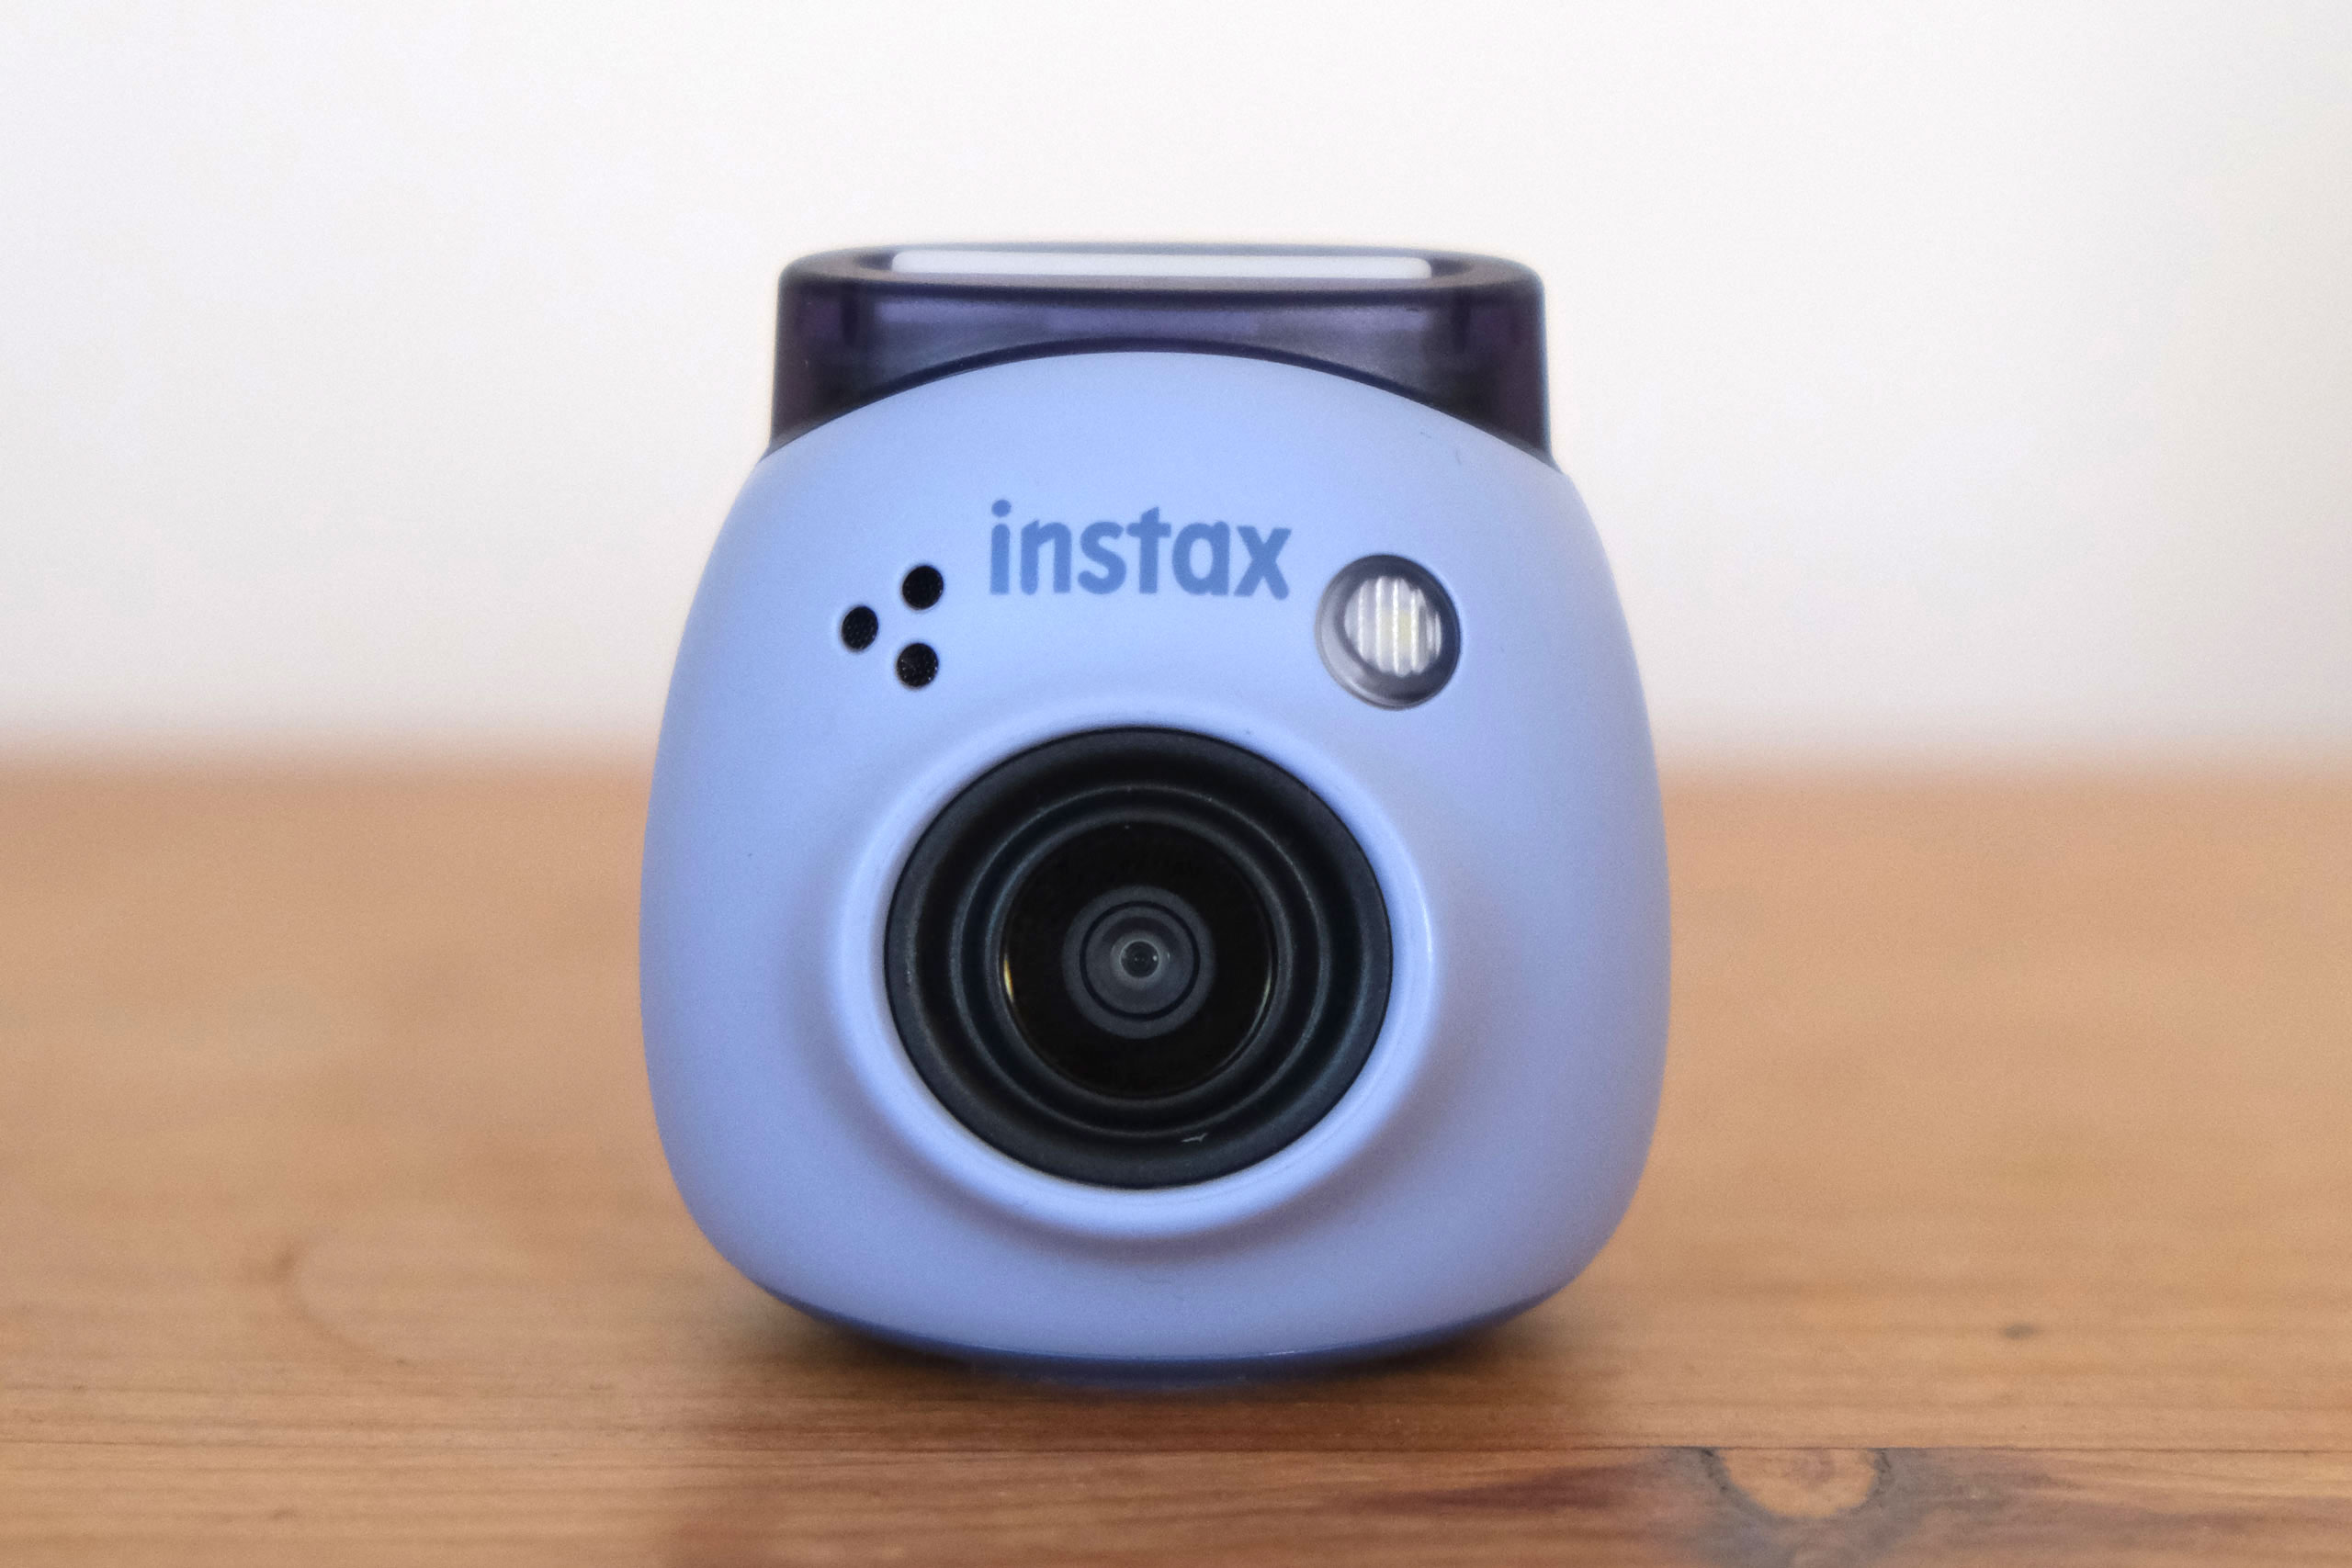 Fujifilm Instax Pal Review: Cute but who is it for? - Amateur